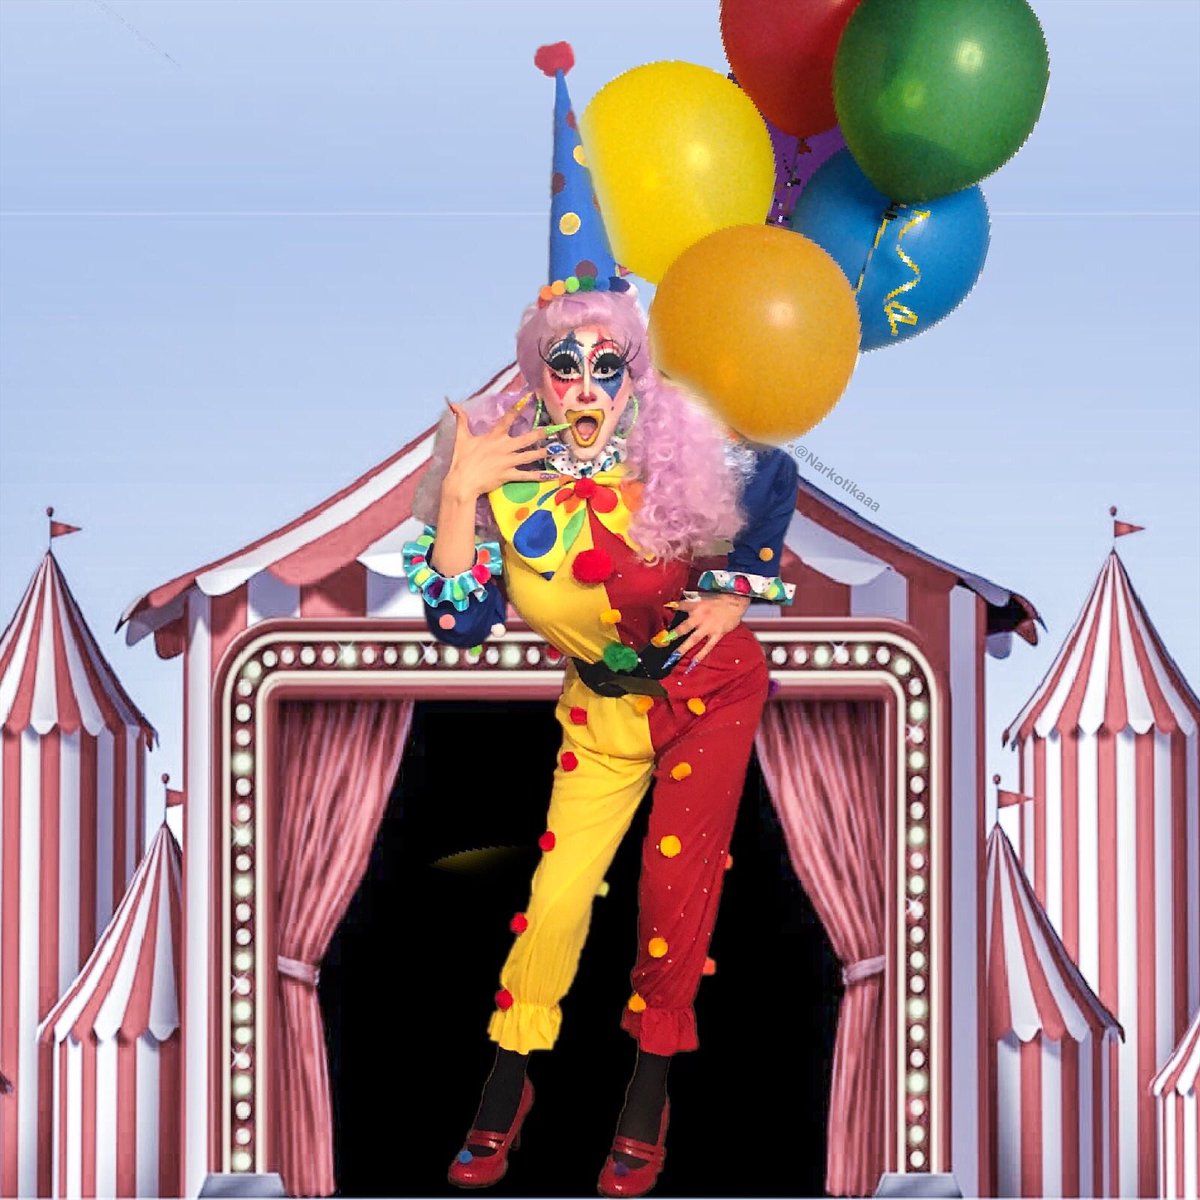 Episode 7: Clownin’ Around SECOND WIN IN A ROW! My second favorite DSD look, it’s totally me. Just clown fantasy world vibes, I rhinestoned everything, added pompoms, made/painted my hat, made ruffled collar/cuffs, custom nails, everything This is me at all times btw 